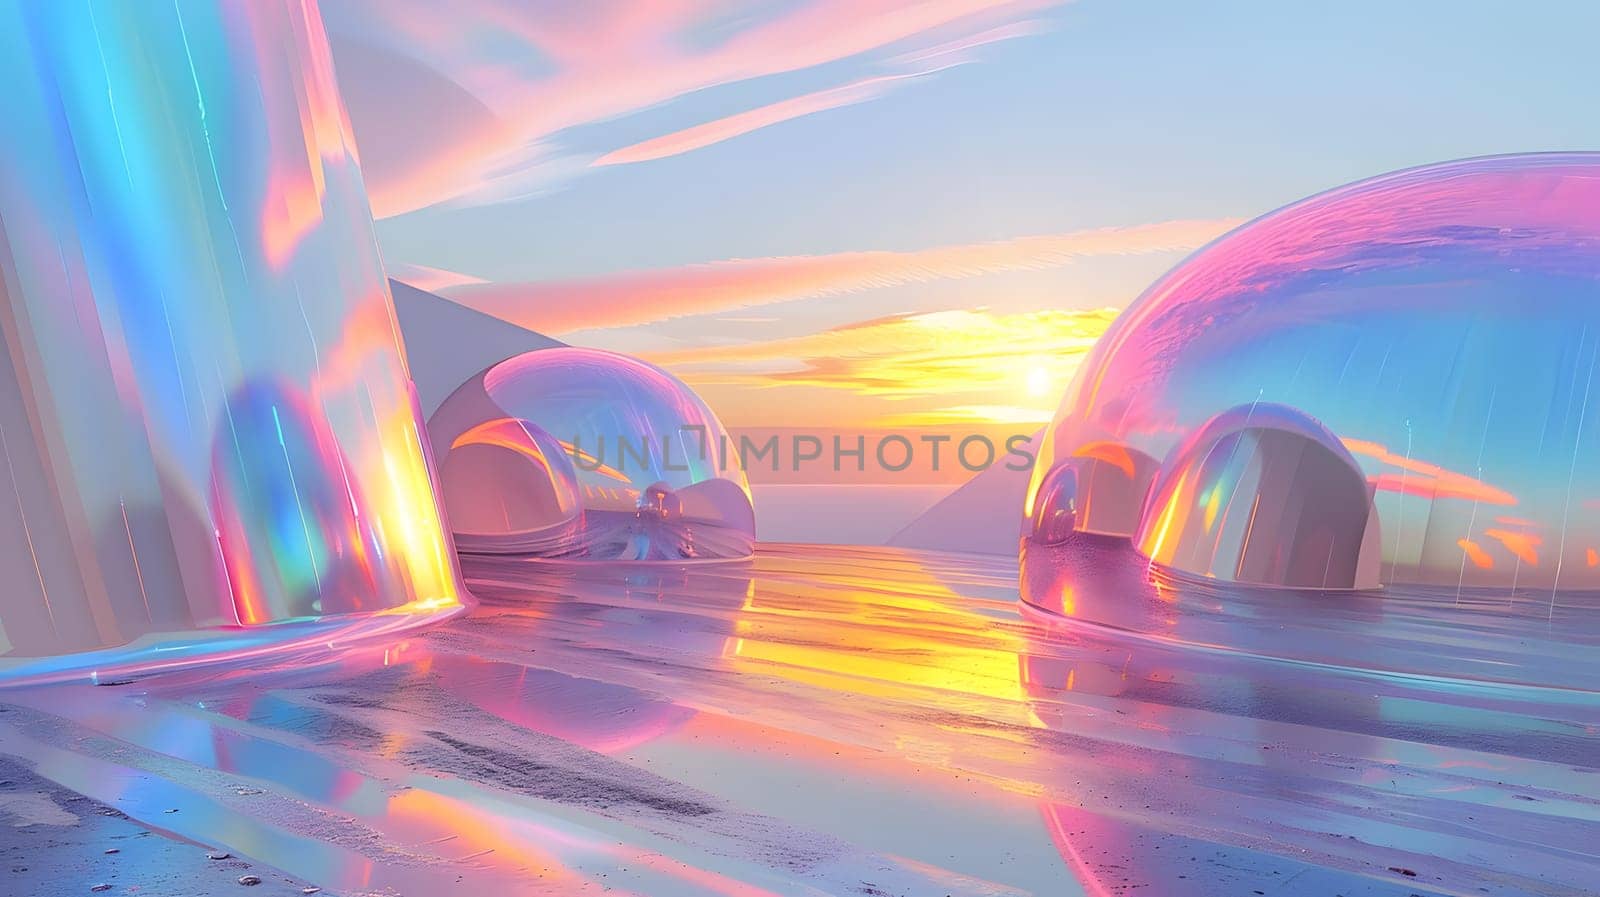 A dusk landscape with iridescent spheres in the water under a colorful sky by Nadtochiy